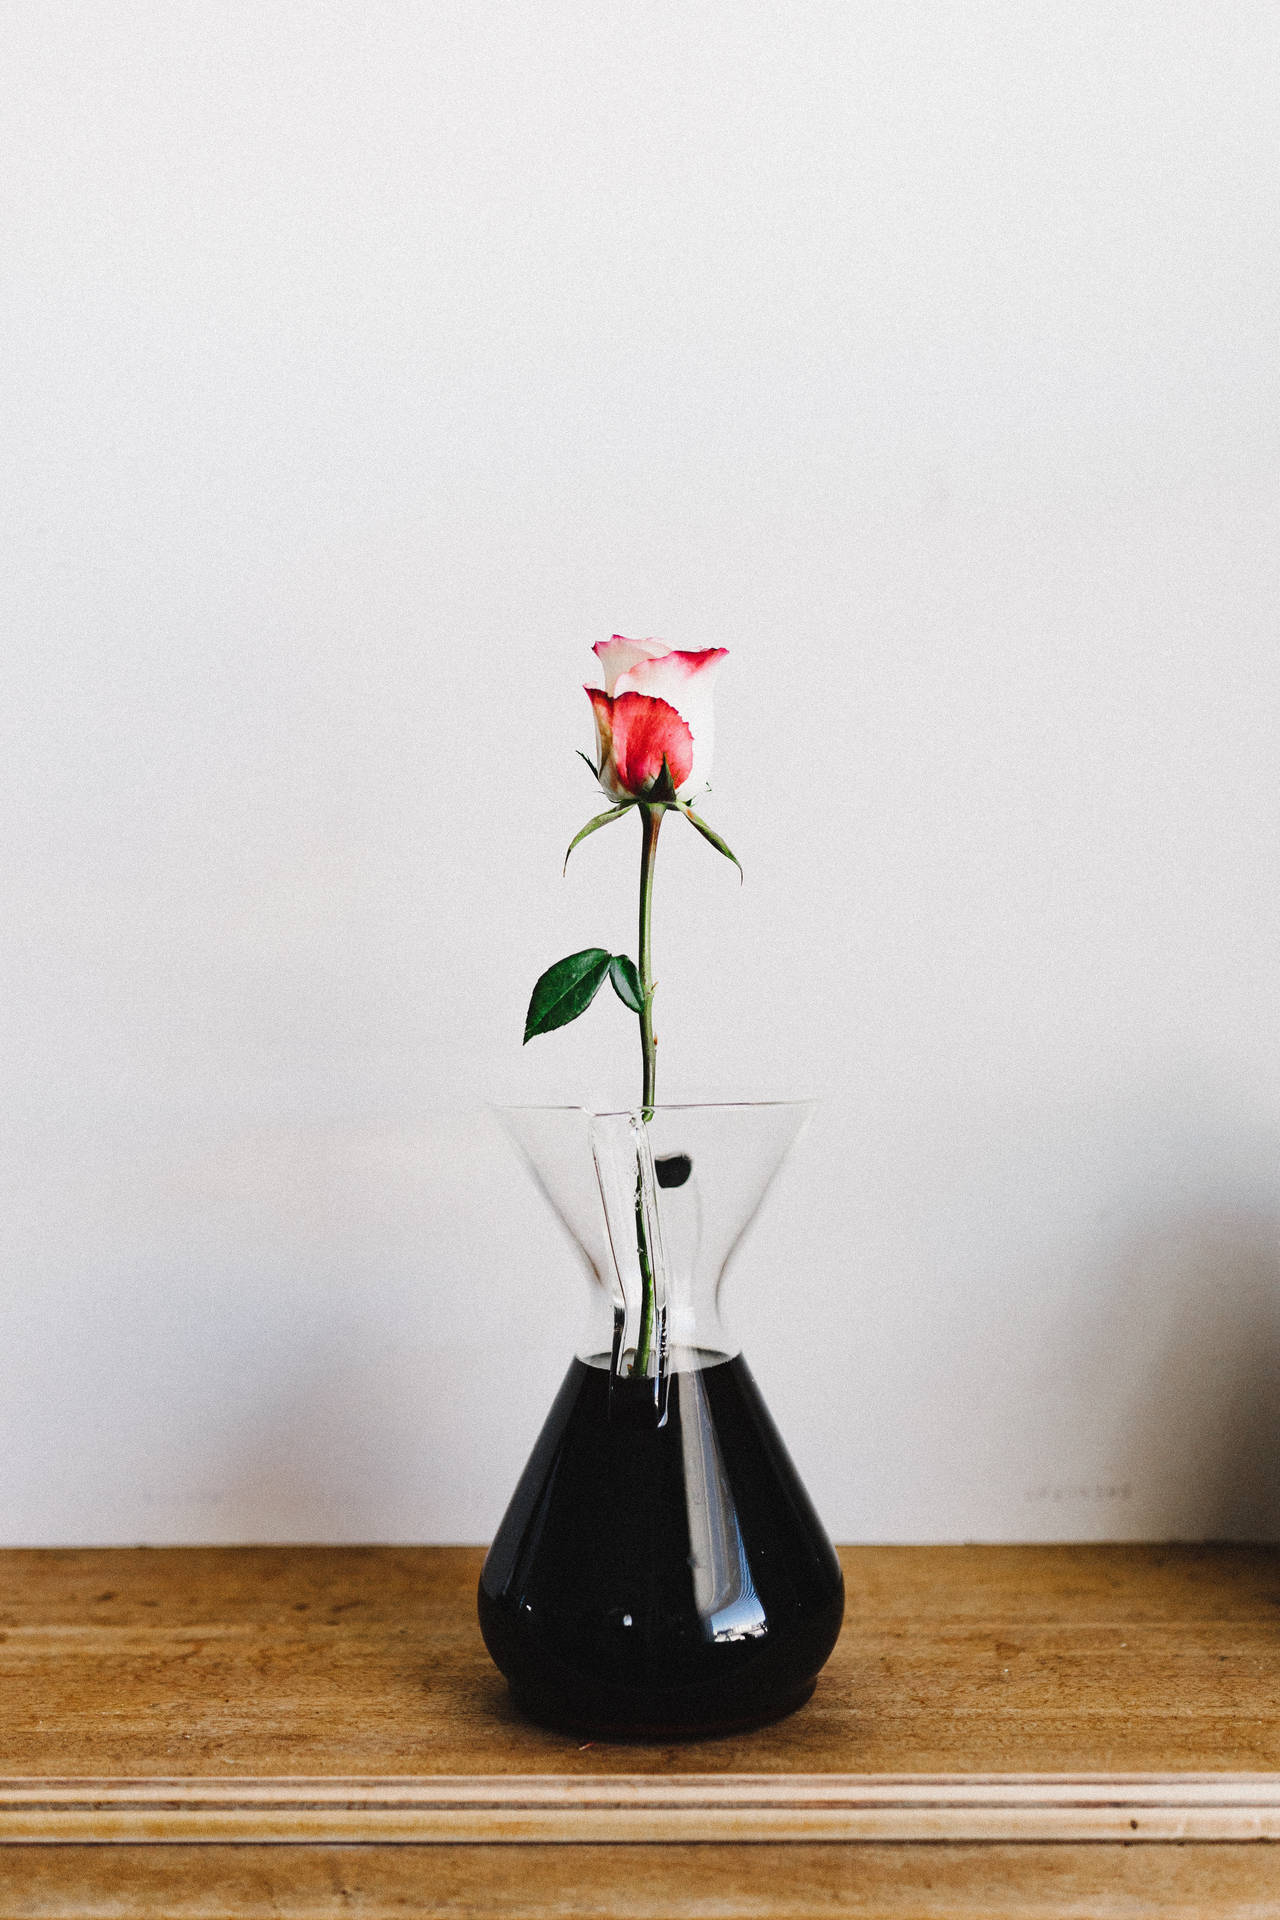 A beautiful rose blossom sitting in a classic vase. Wallpaper